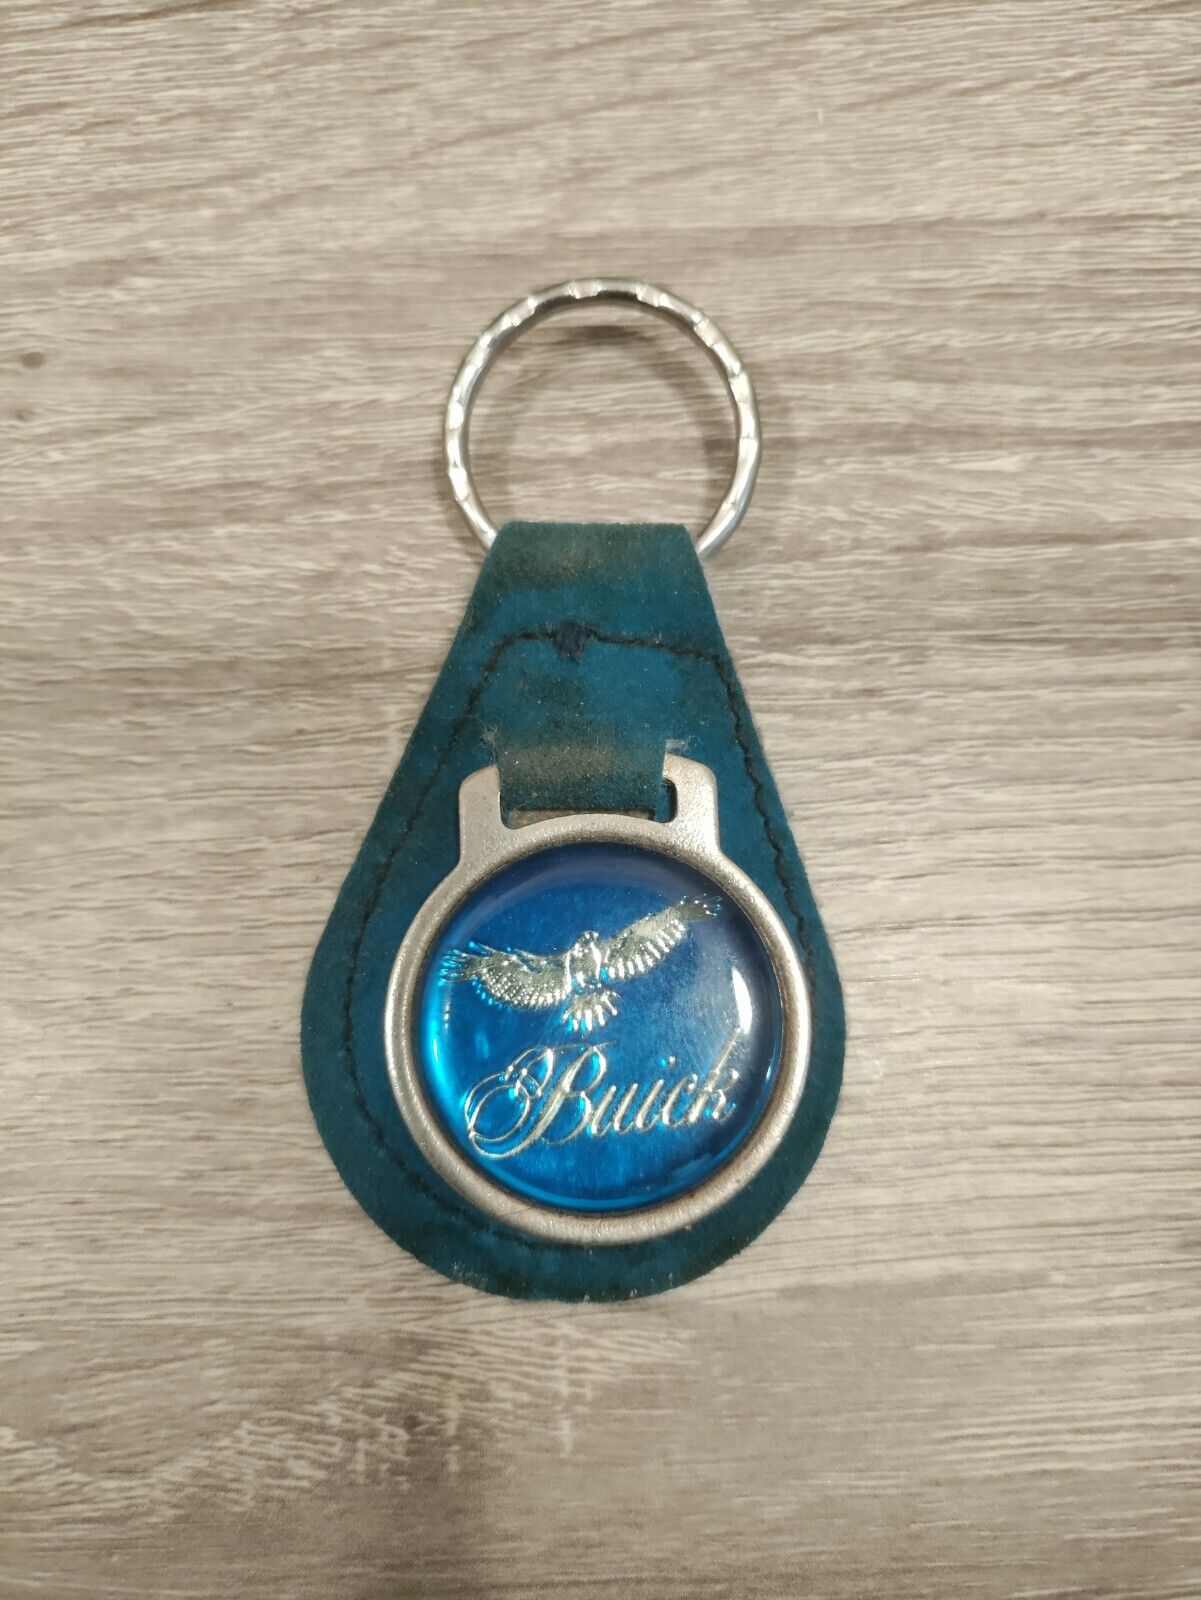 RARE VINTAGE BUICK Blue Leather Key Chain Ring 